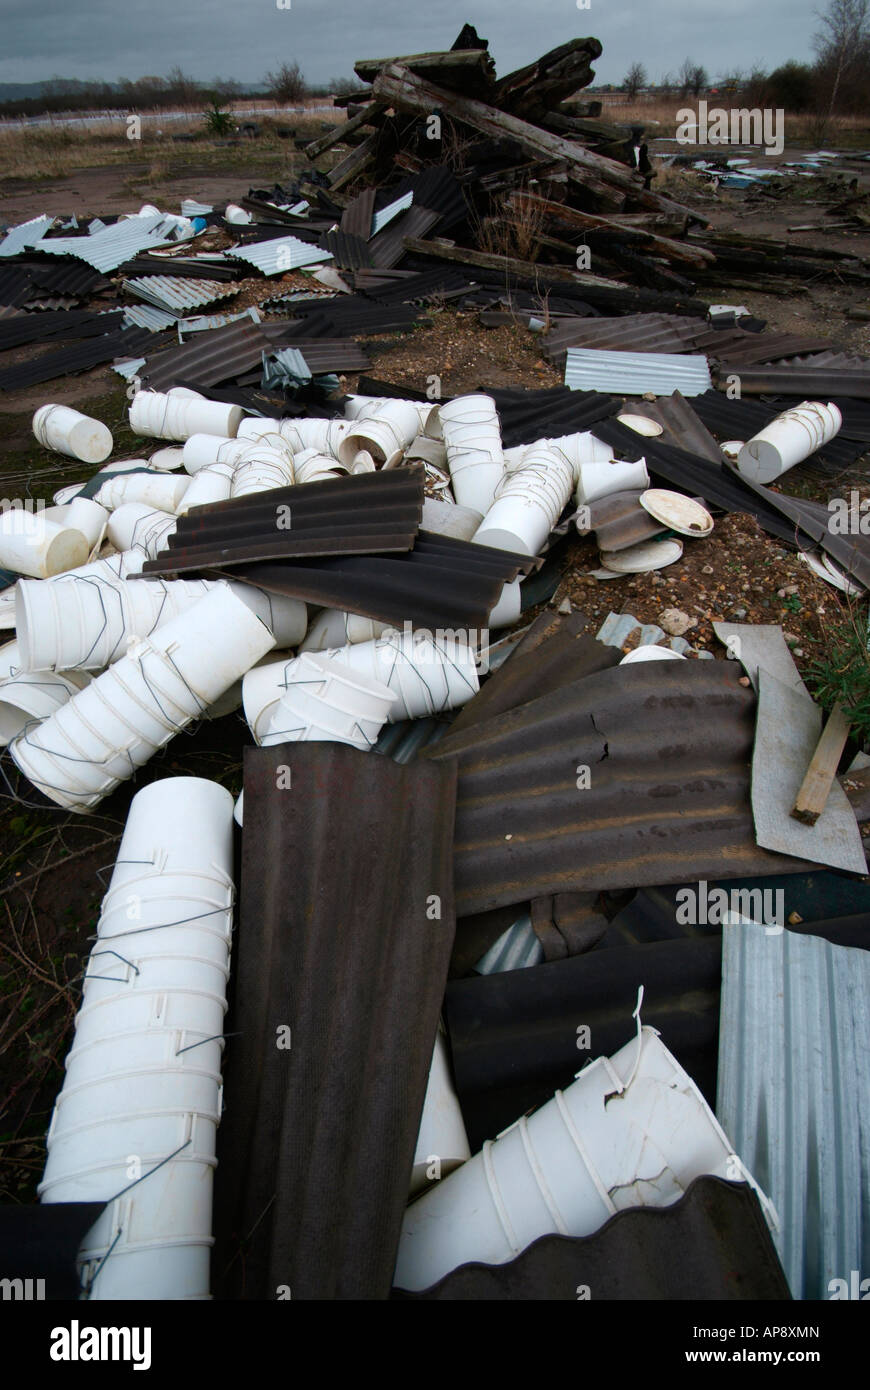 Rubbish dumped on the ground litters the landscape. Stock Photo